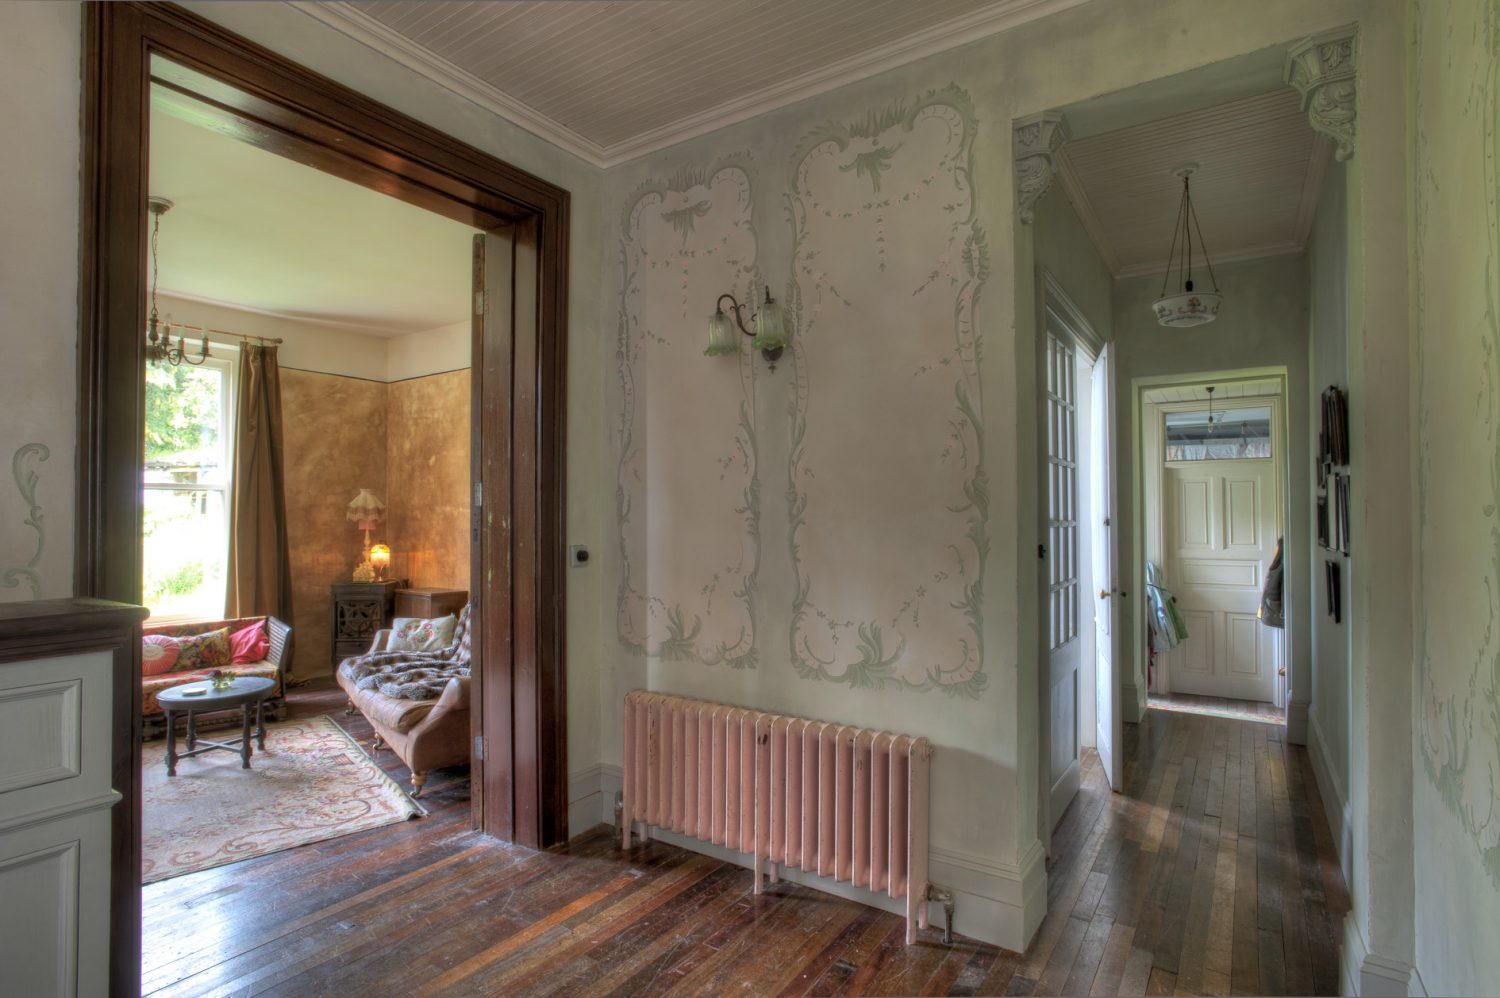 Susan’s delicately painted trompe l’oeil wall panels are a striking feature throughout the house